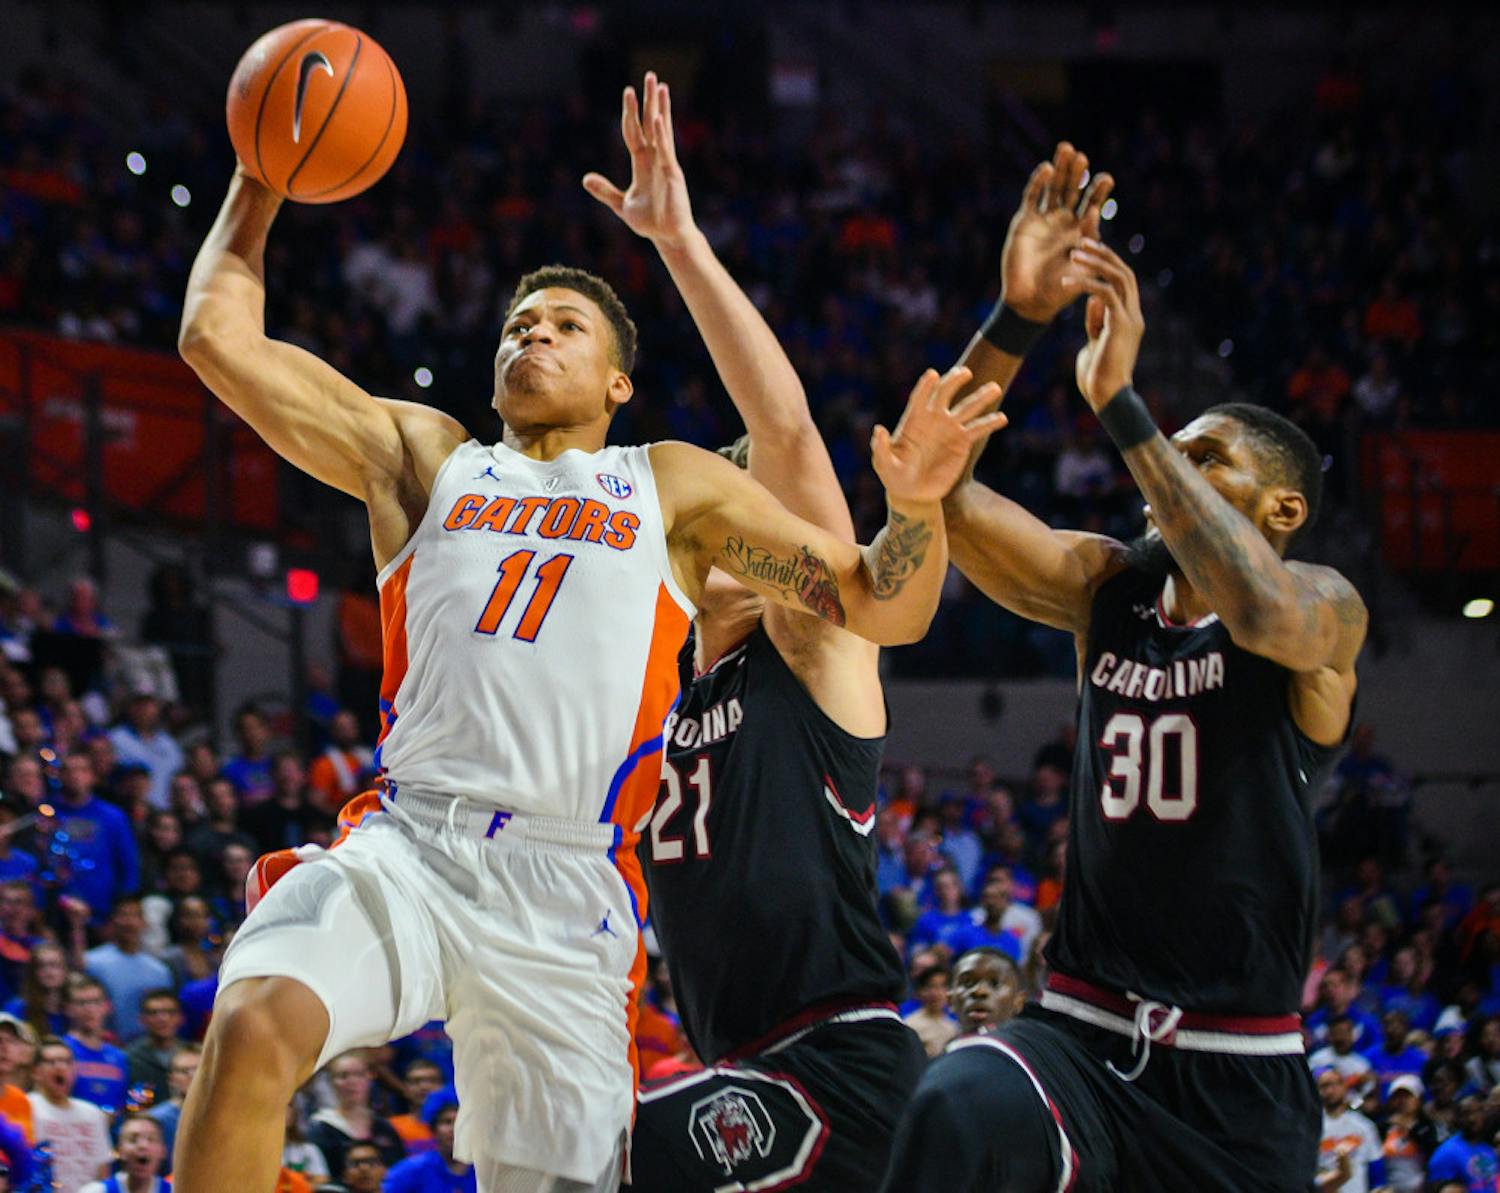 Forward Keyontae Johnson led the Gators in rebounds (8) in their loss to TCU on Saturday. He also scored nine points but was limited to 21 minutes due to foul trouble. 